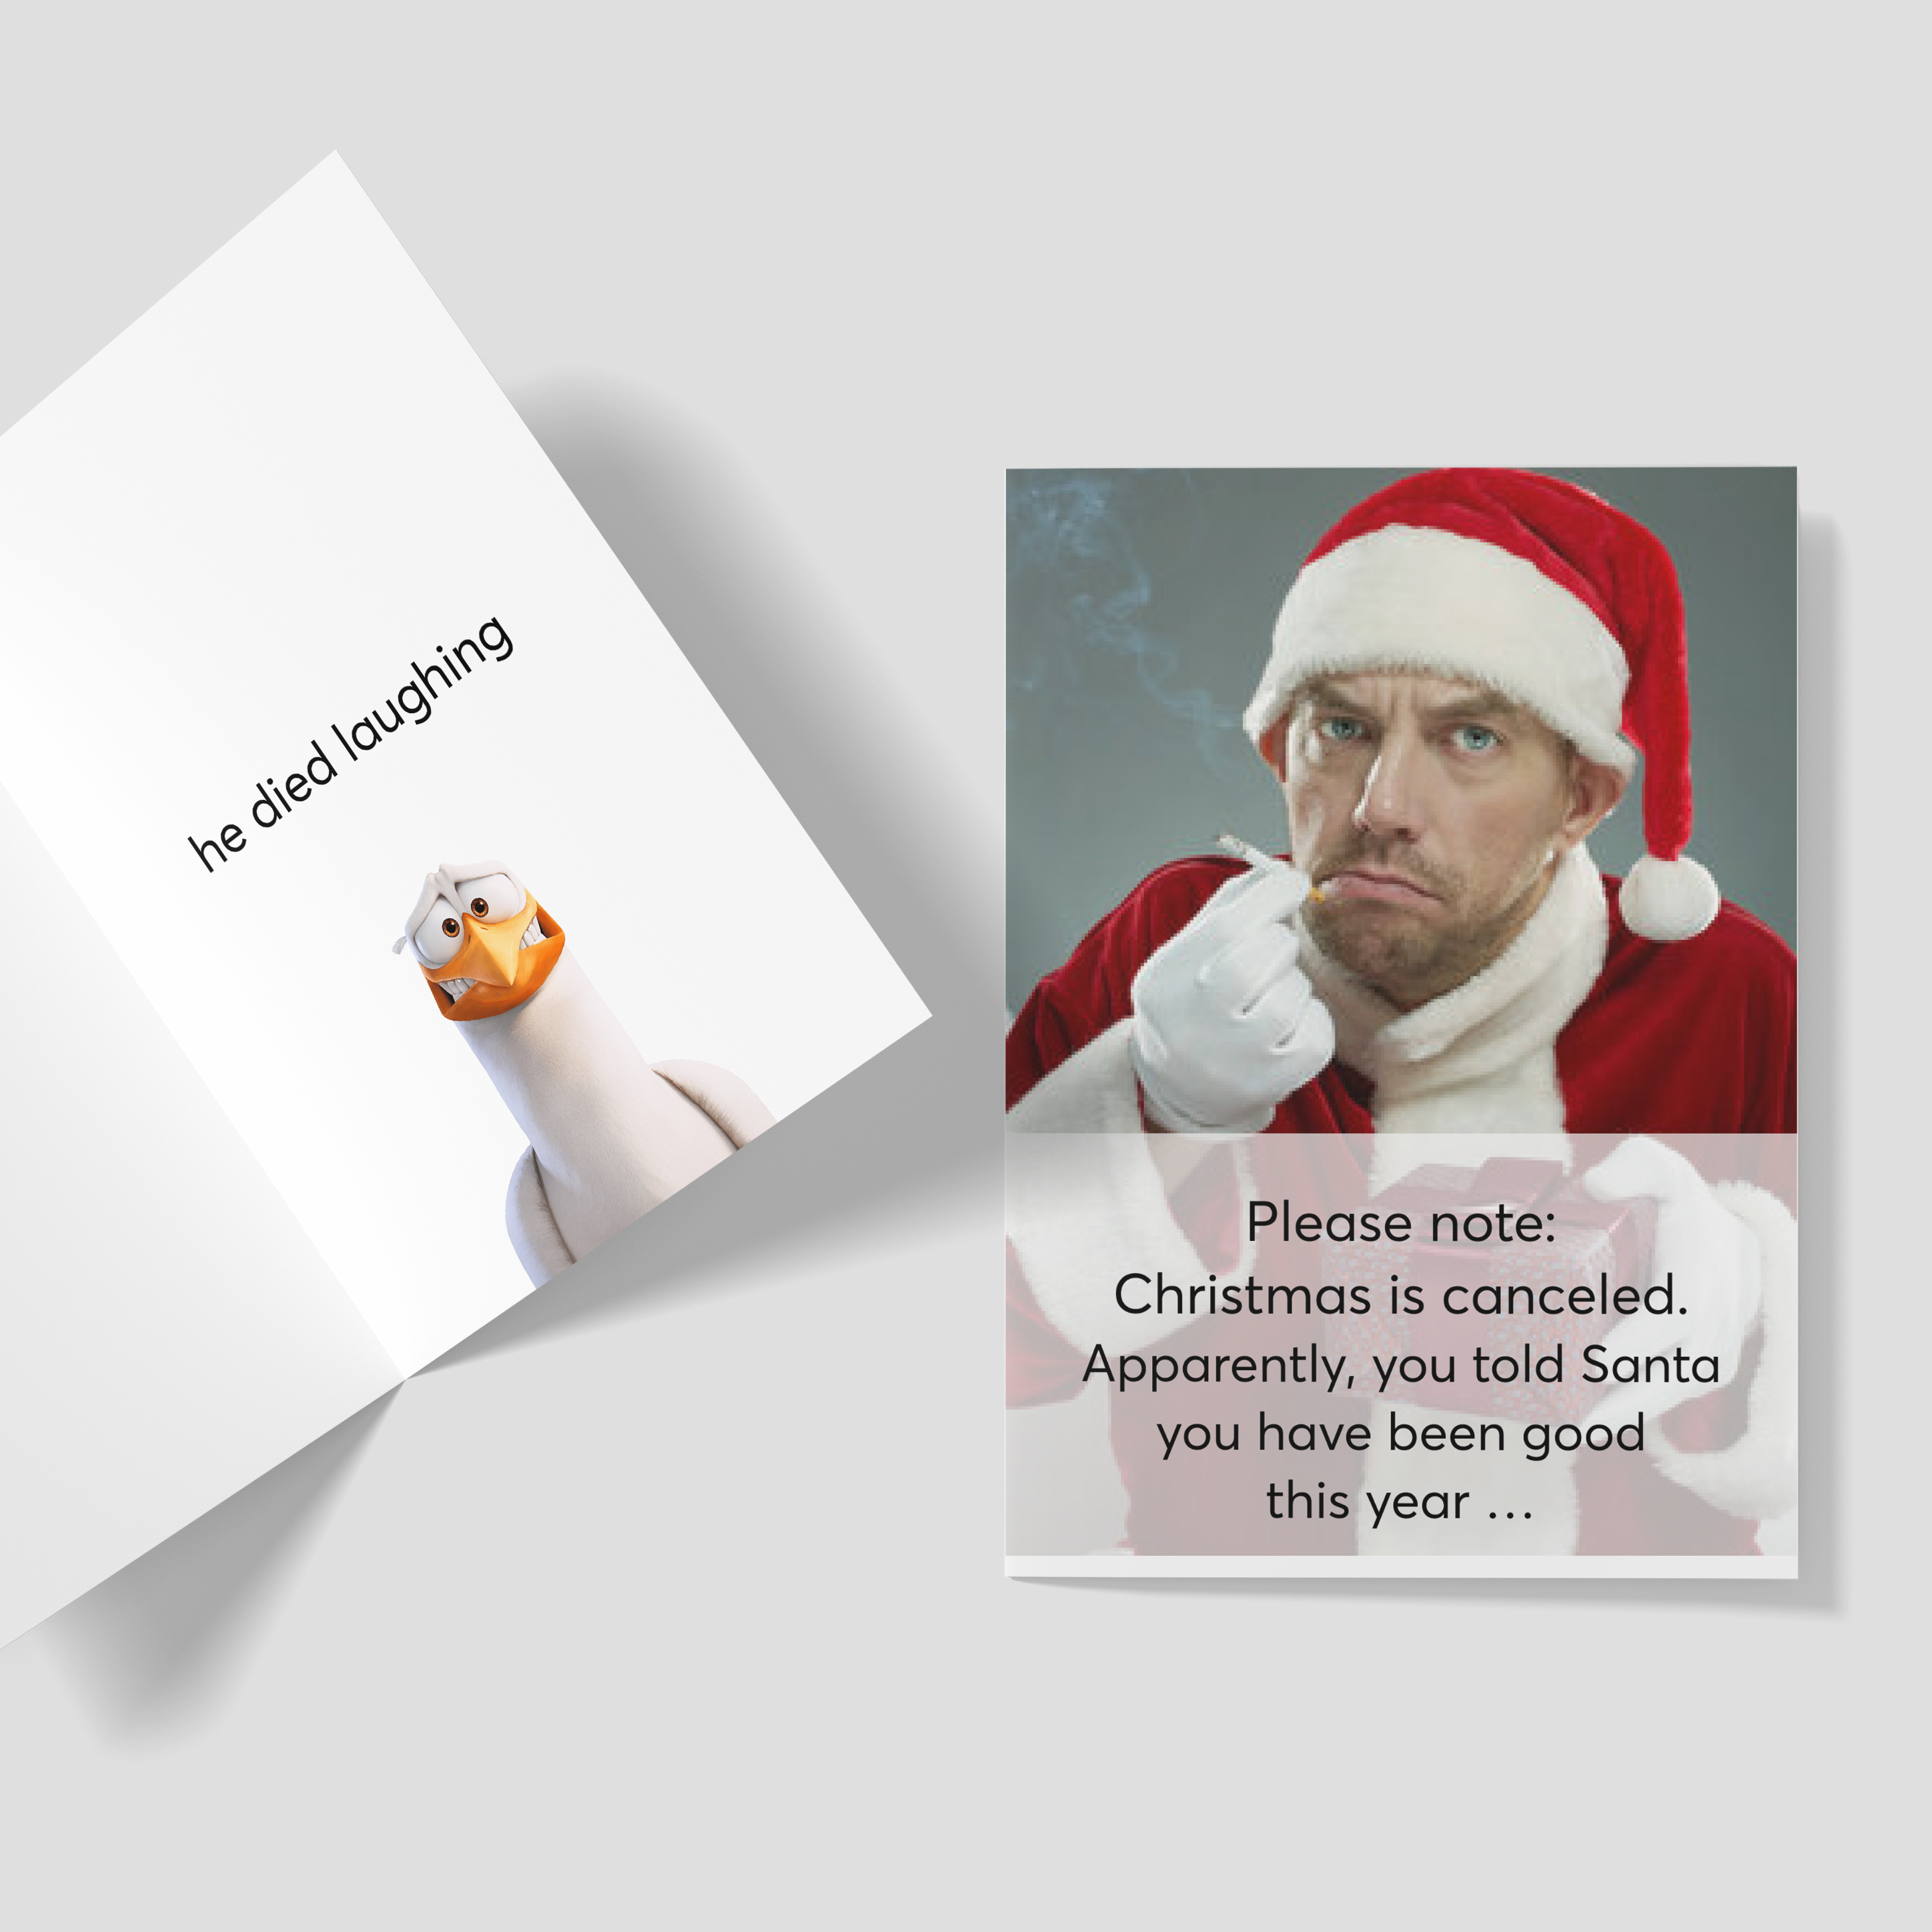 Free Postcard: Christmas is Canceled cover image.